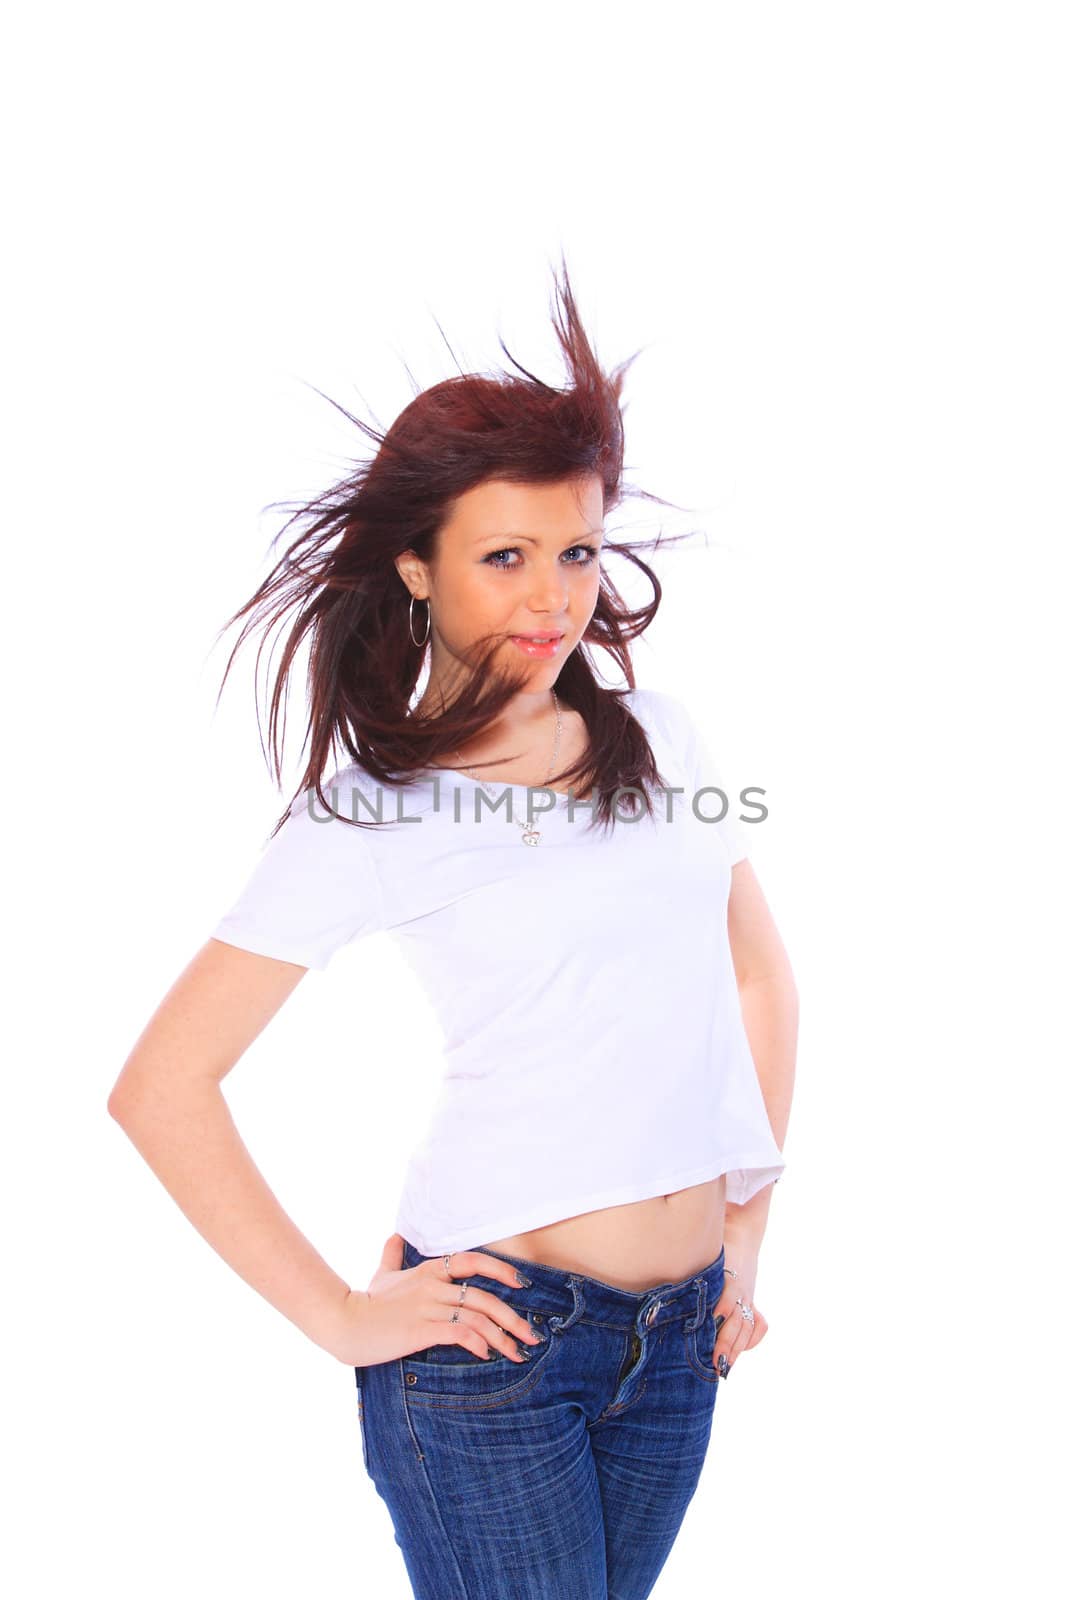 smiling young woman in jeans and t shirt, studioshot over white background